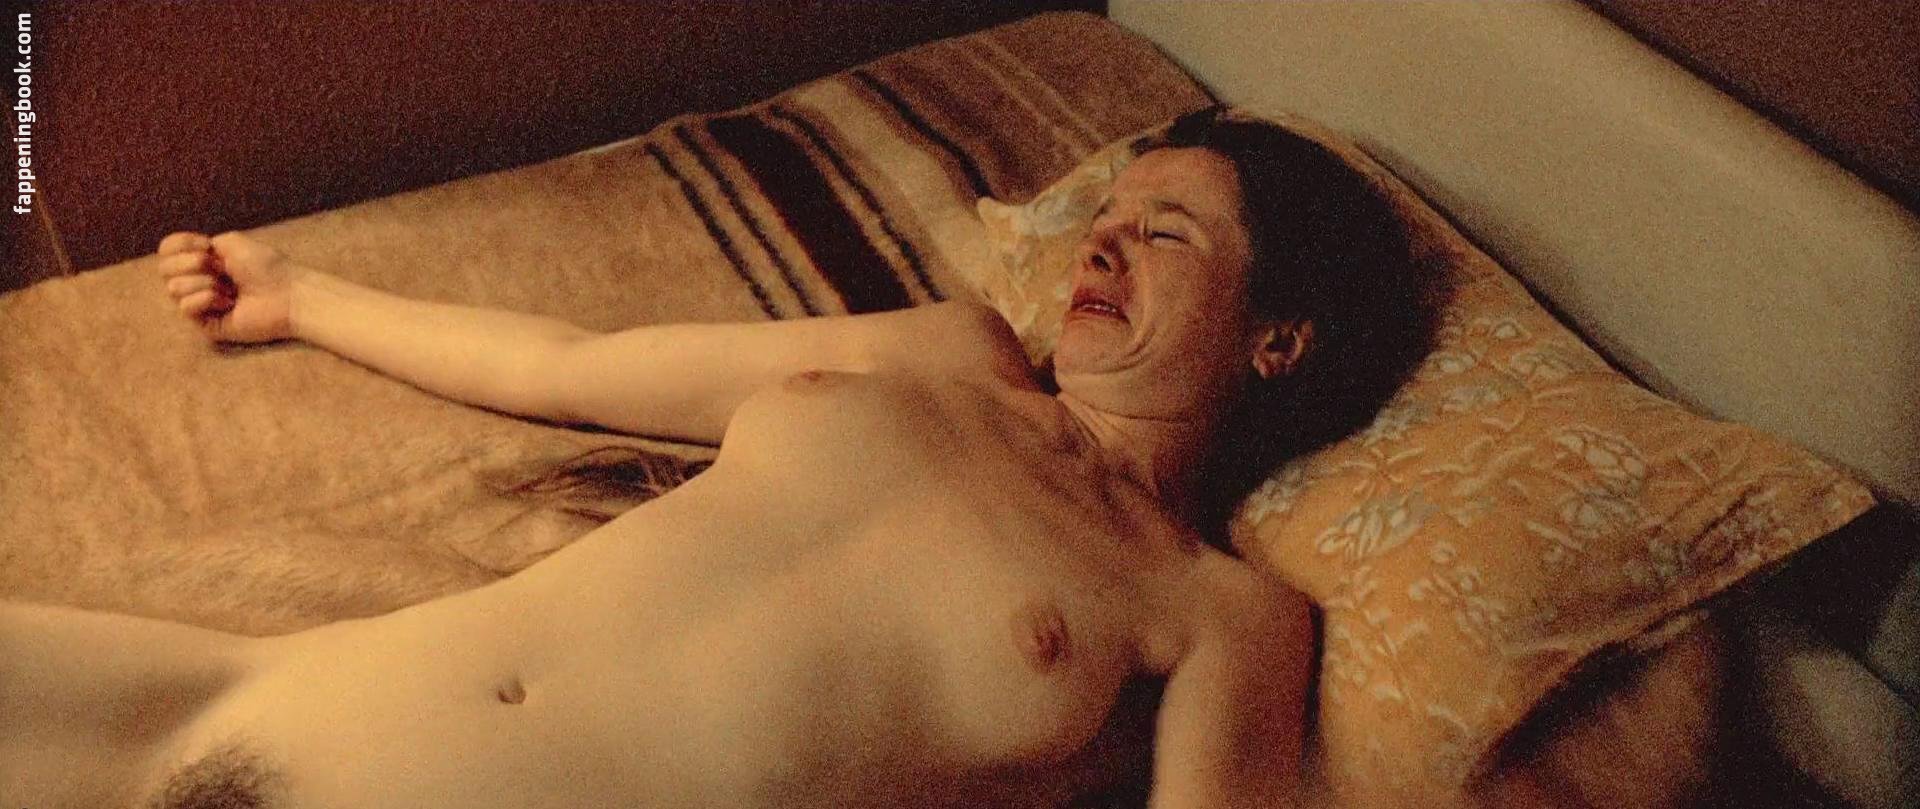 Emily Watson Nude, The Fappening - Photo #175232 - FappeningBook.